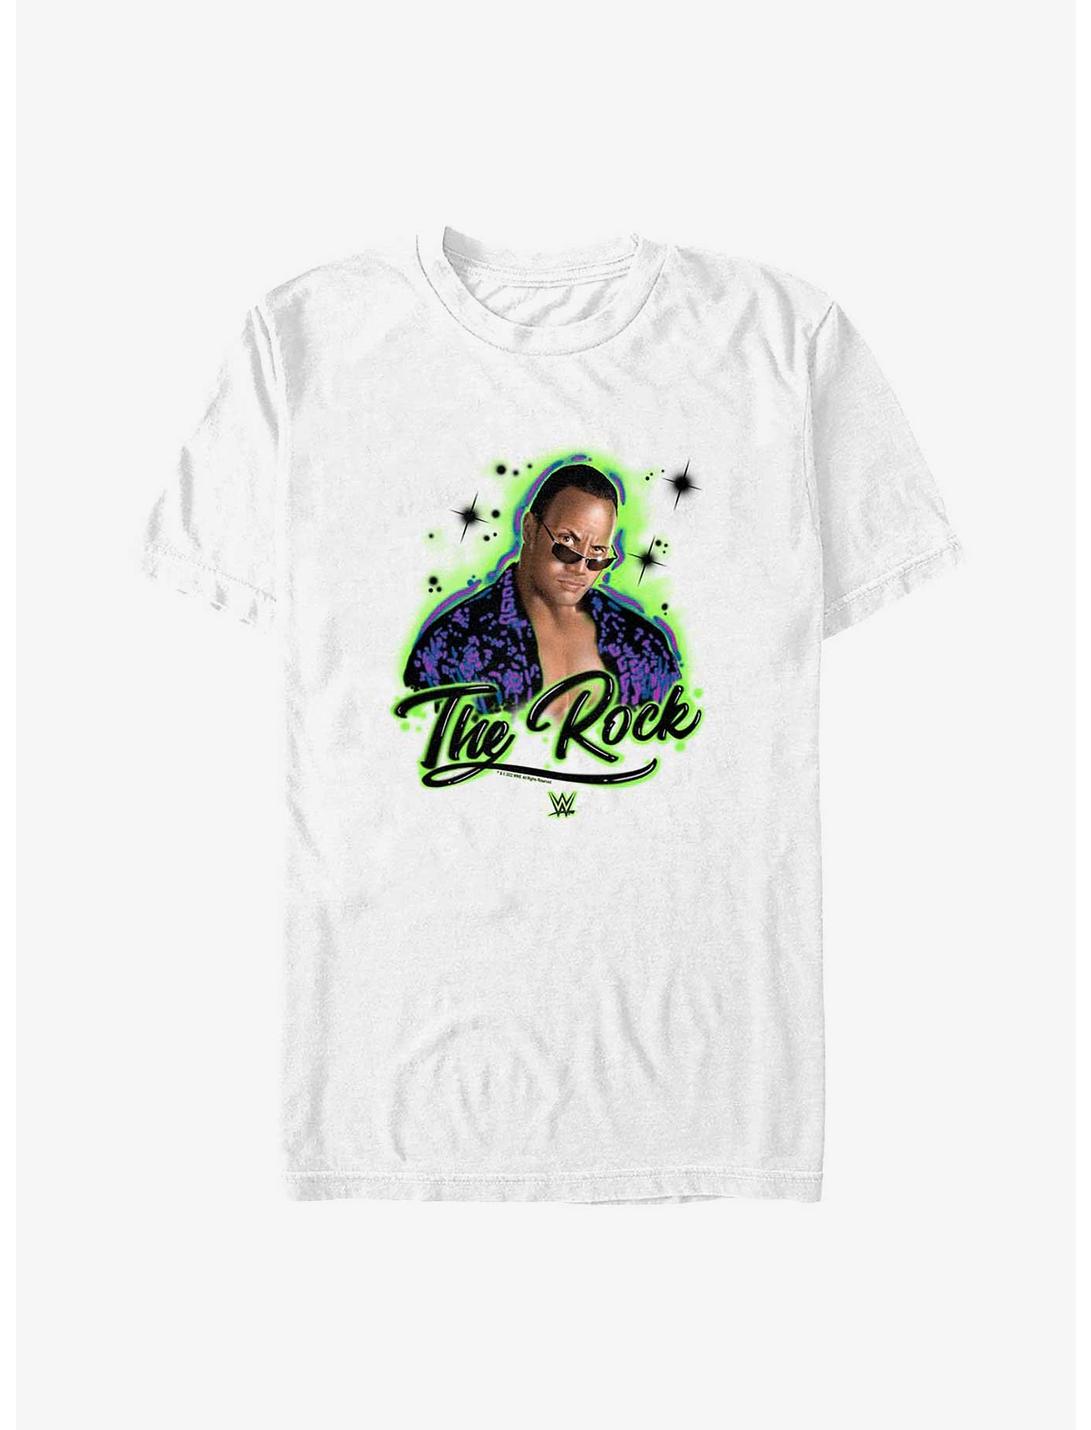 WWE The Rock Airbrushed Paint Style Portrait T-Shirt, WHITE, hi-res